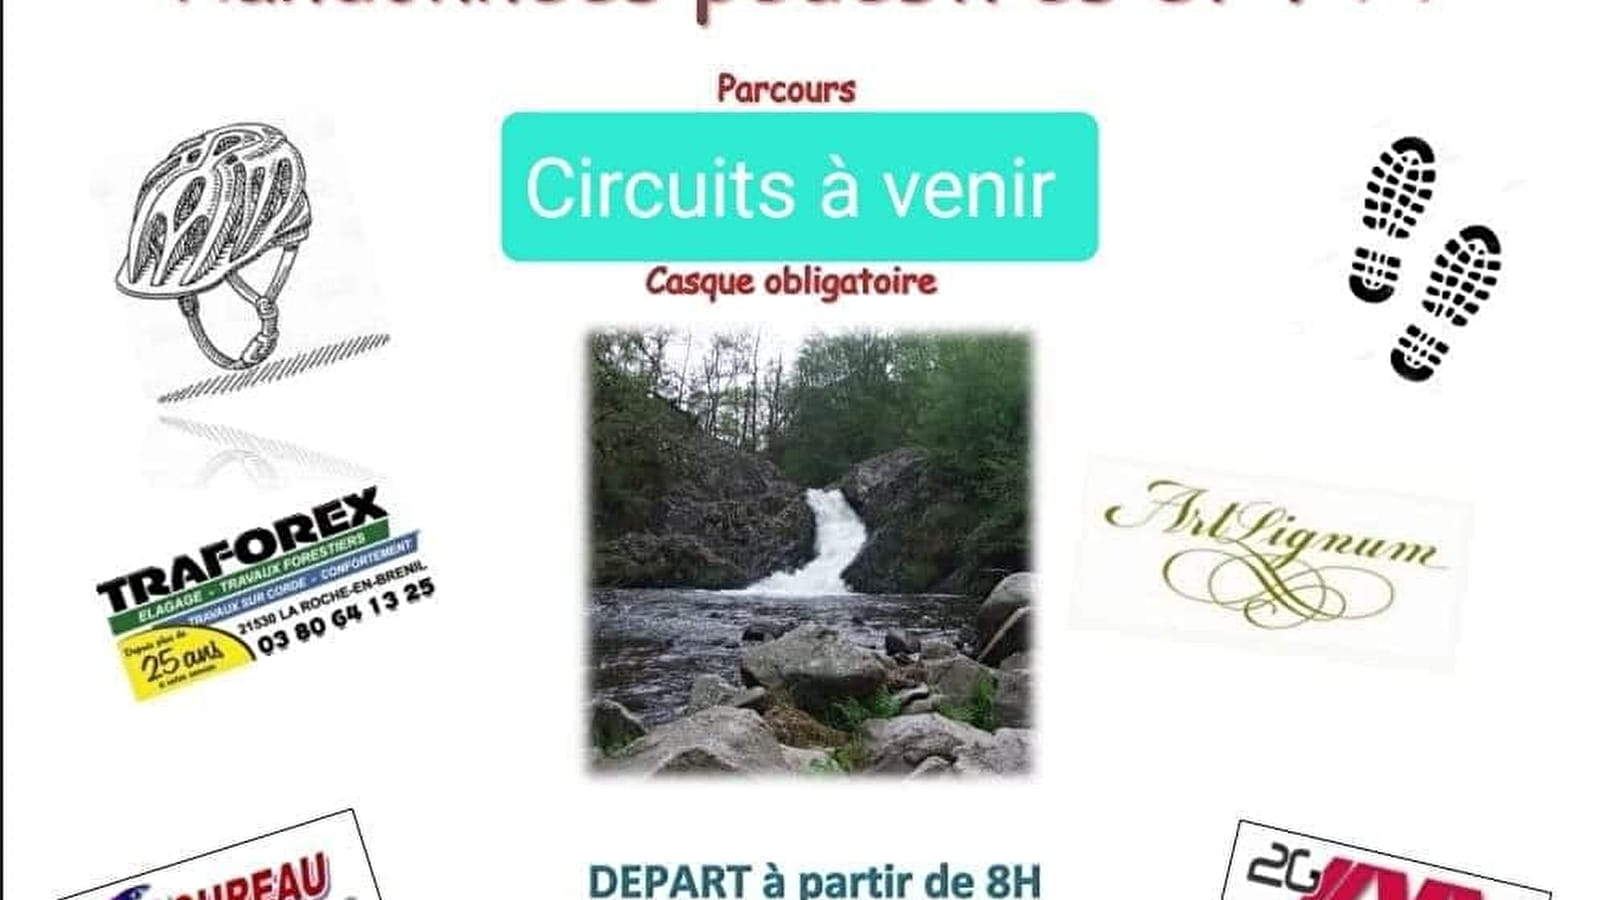 The Gouloux waterfalls